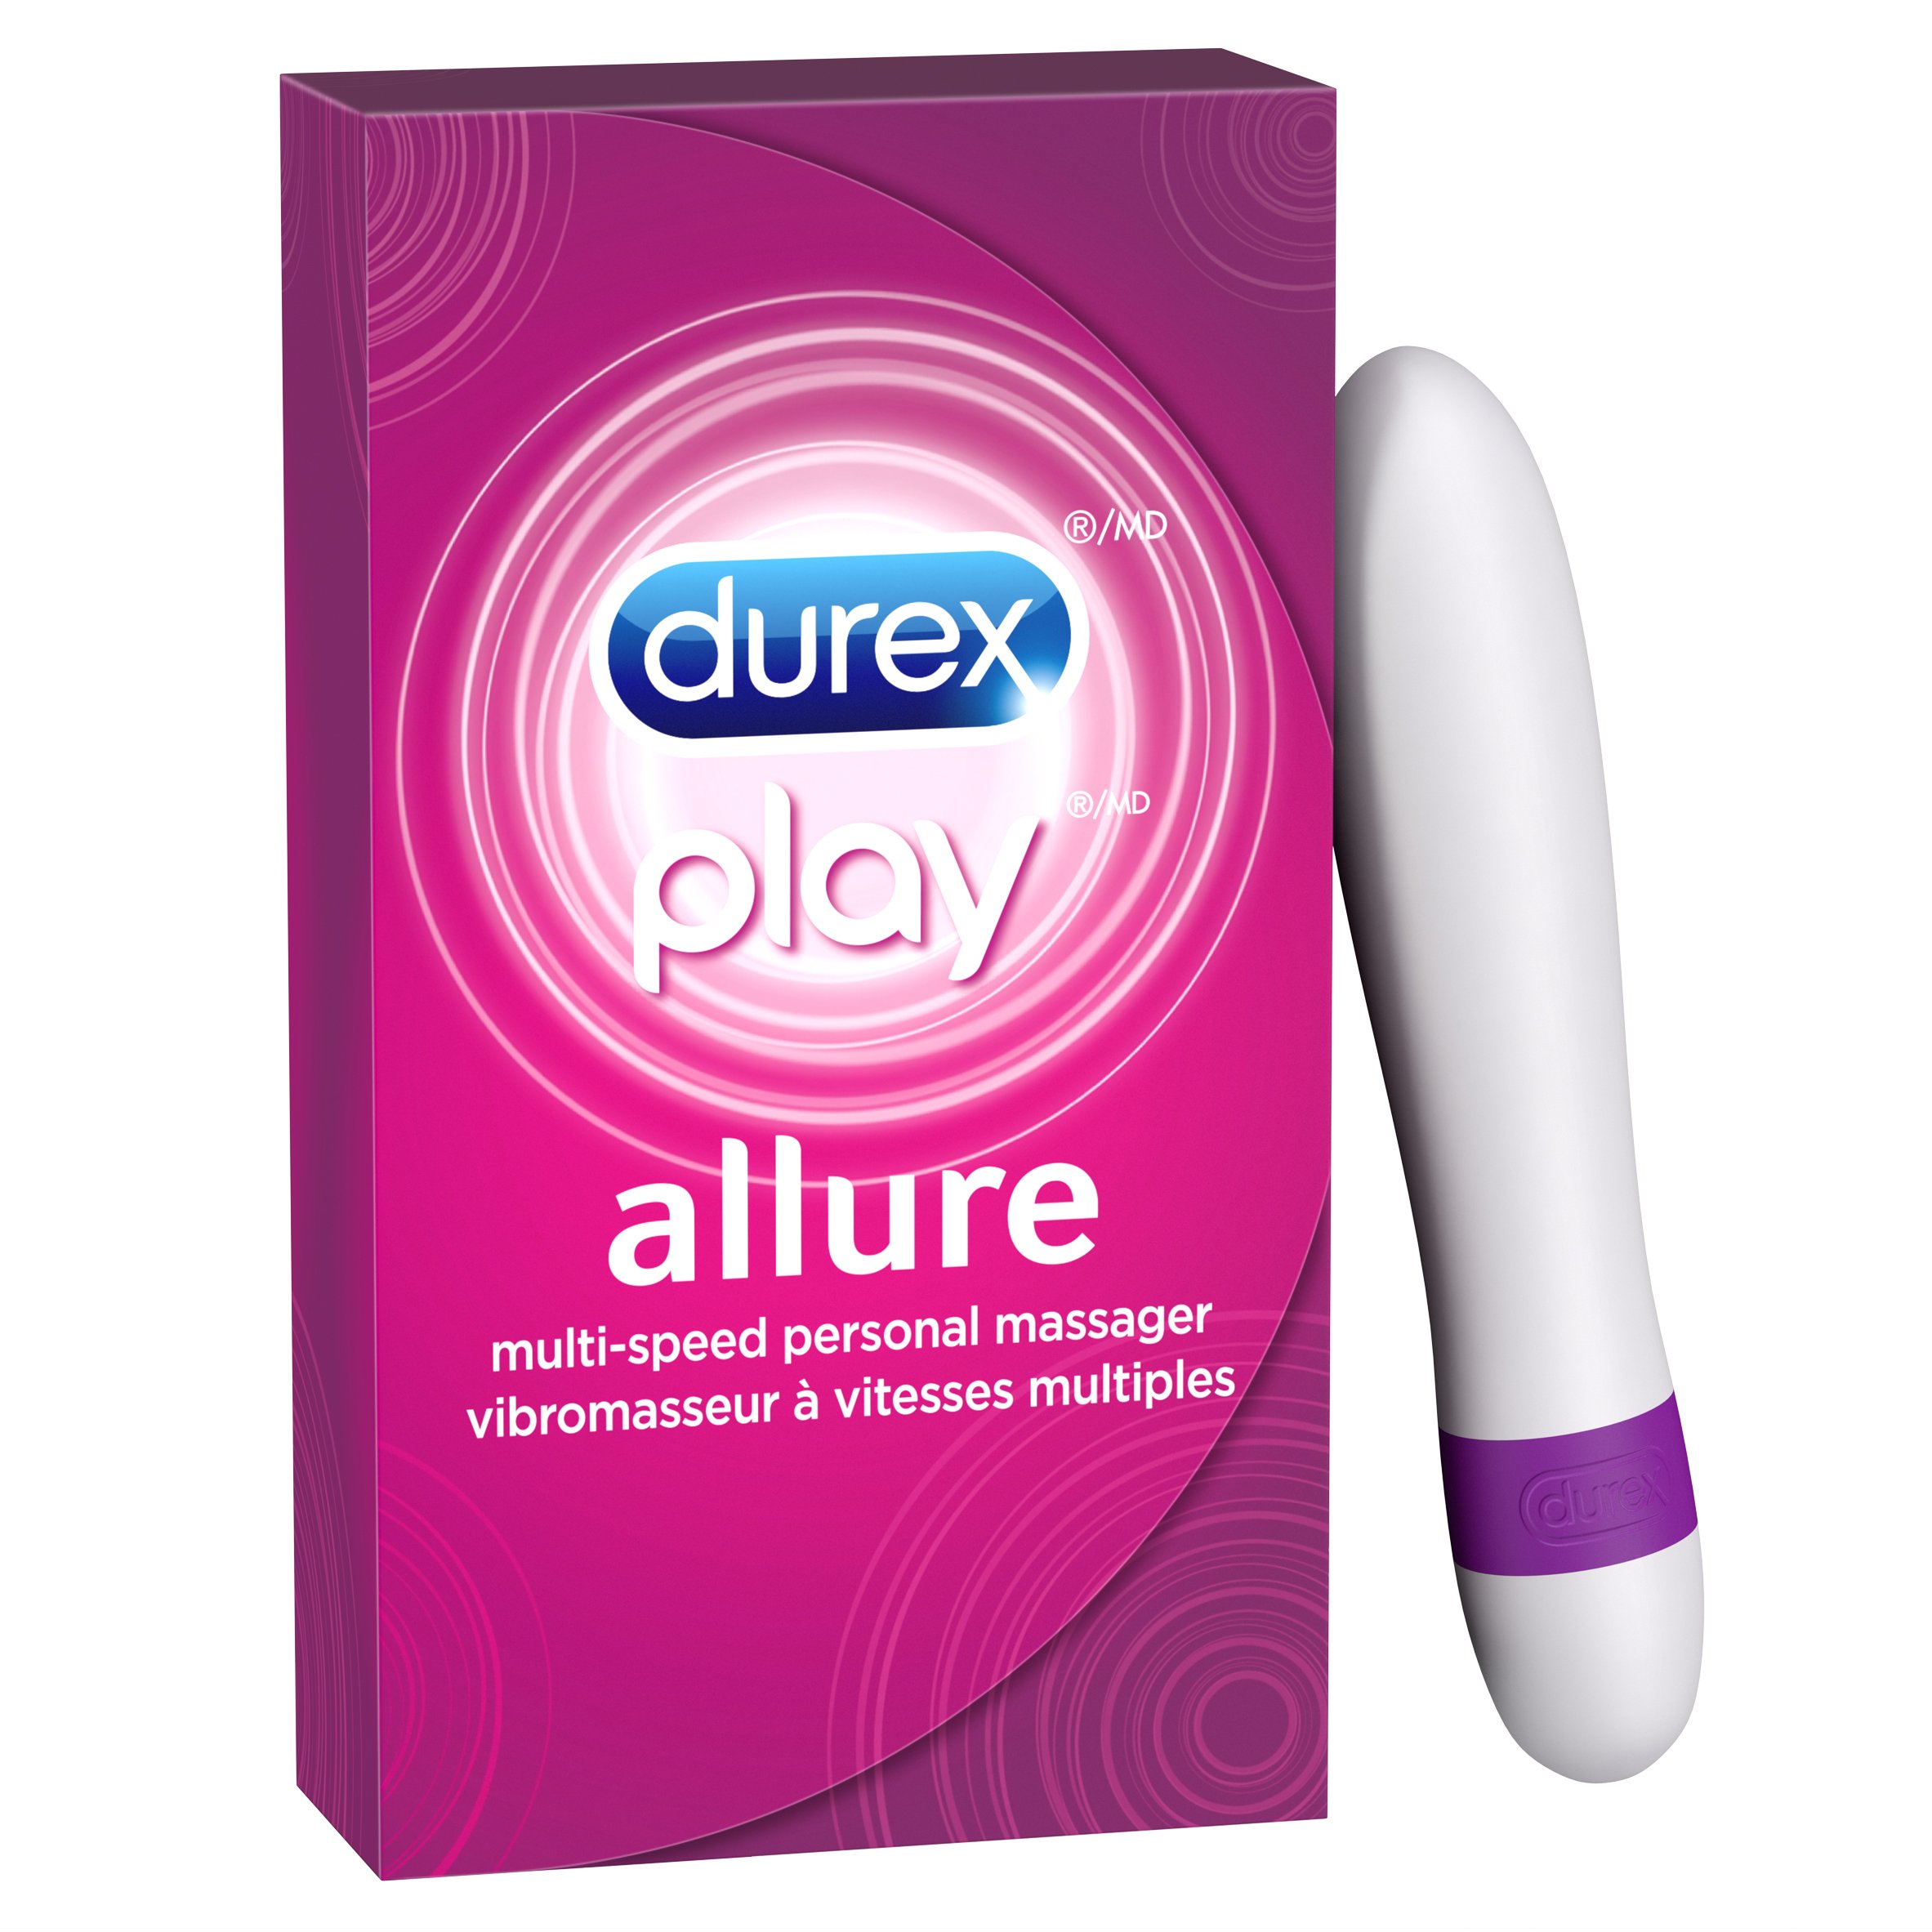 play allure personal massager